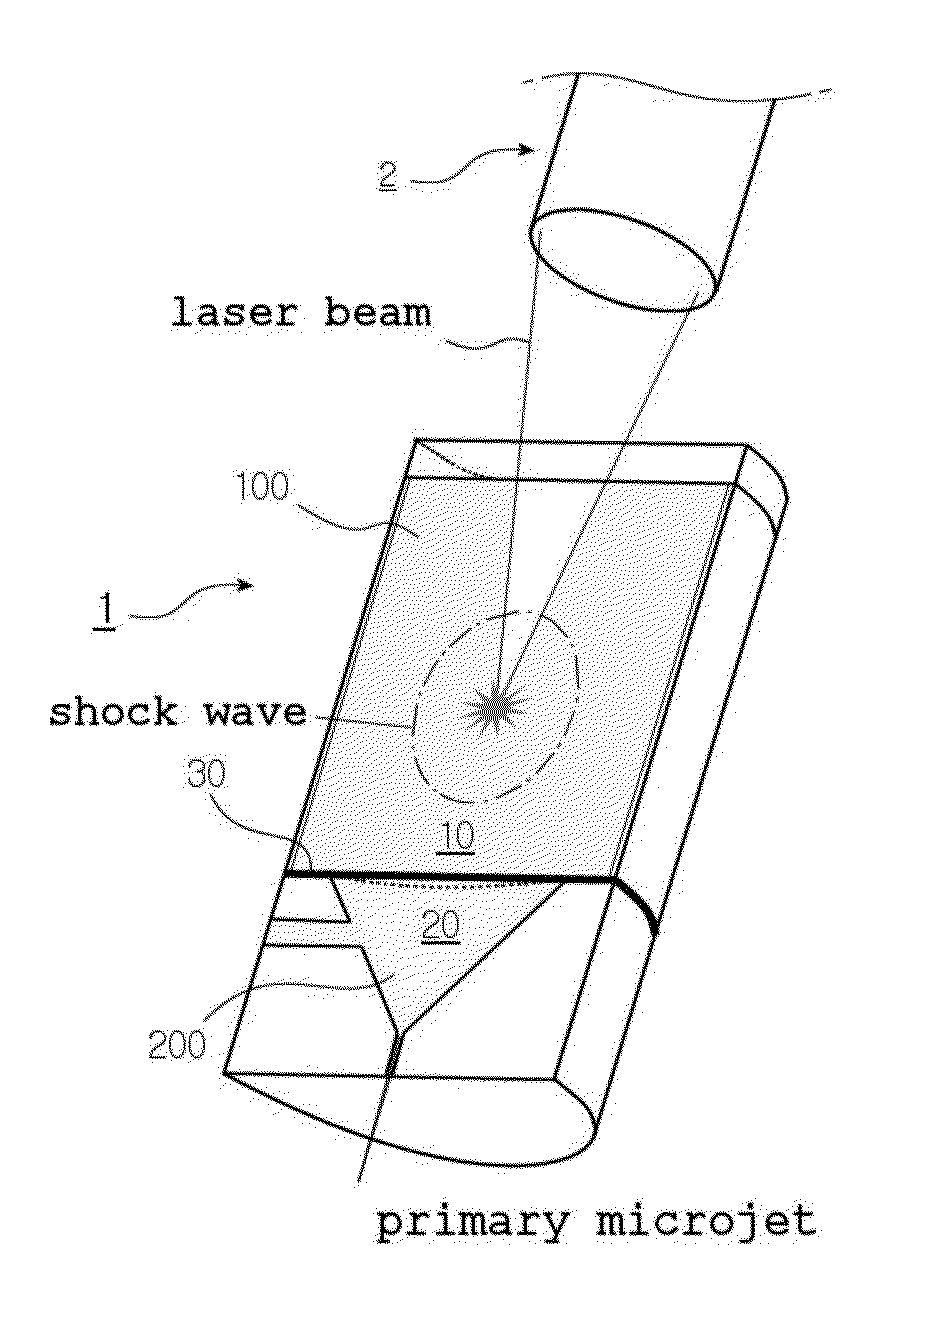 Microjet drug delivery system and microjet injector